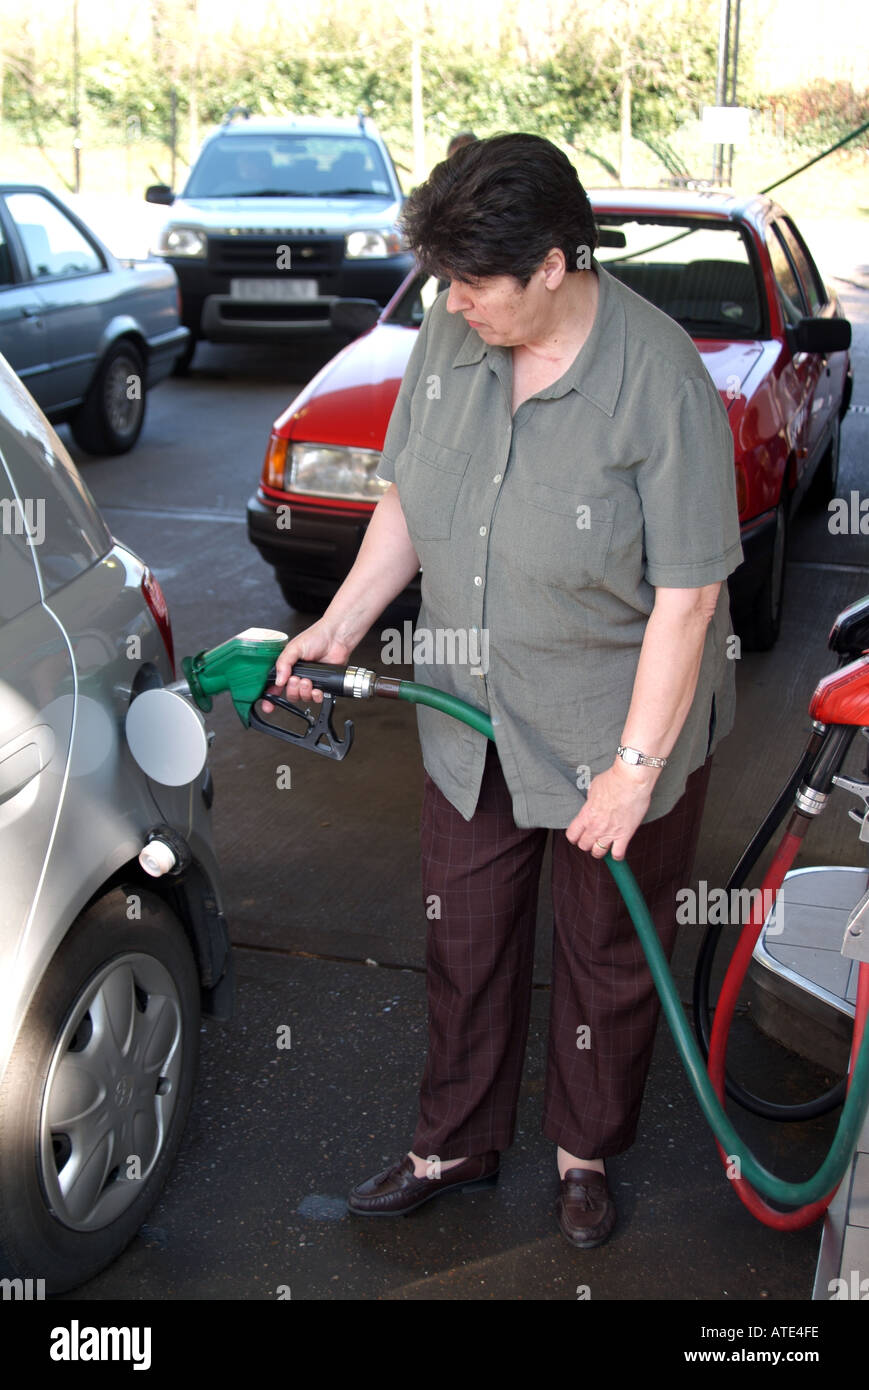 London Tesco Extra supermarket filling station forecourt model released mature woman filling up with petrol into Toyota Yaris hatchback car England UK Stock Photo